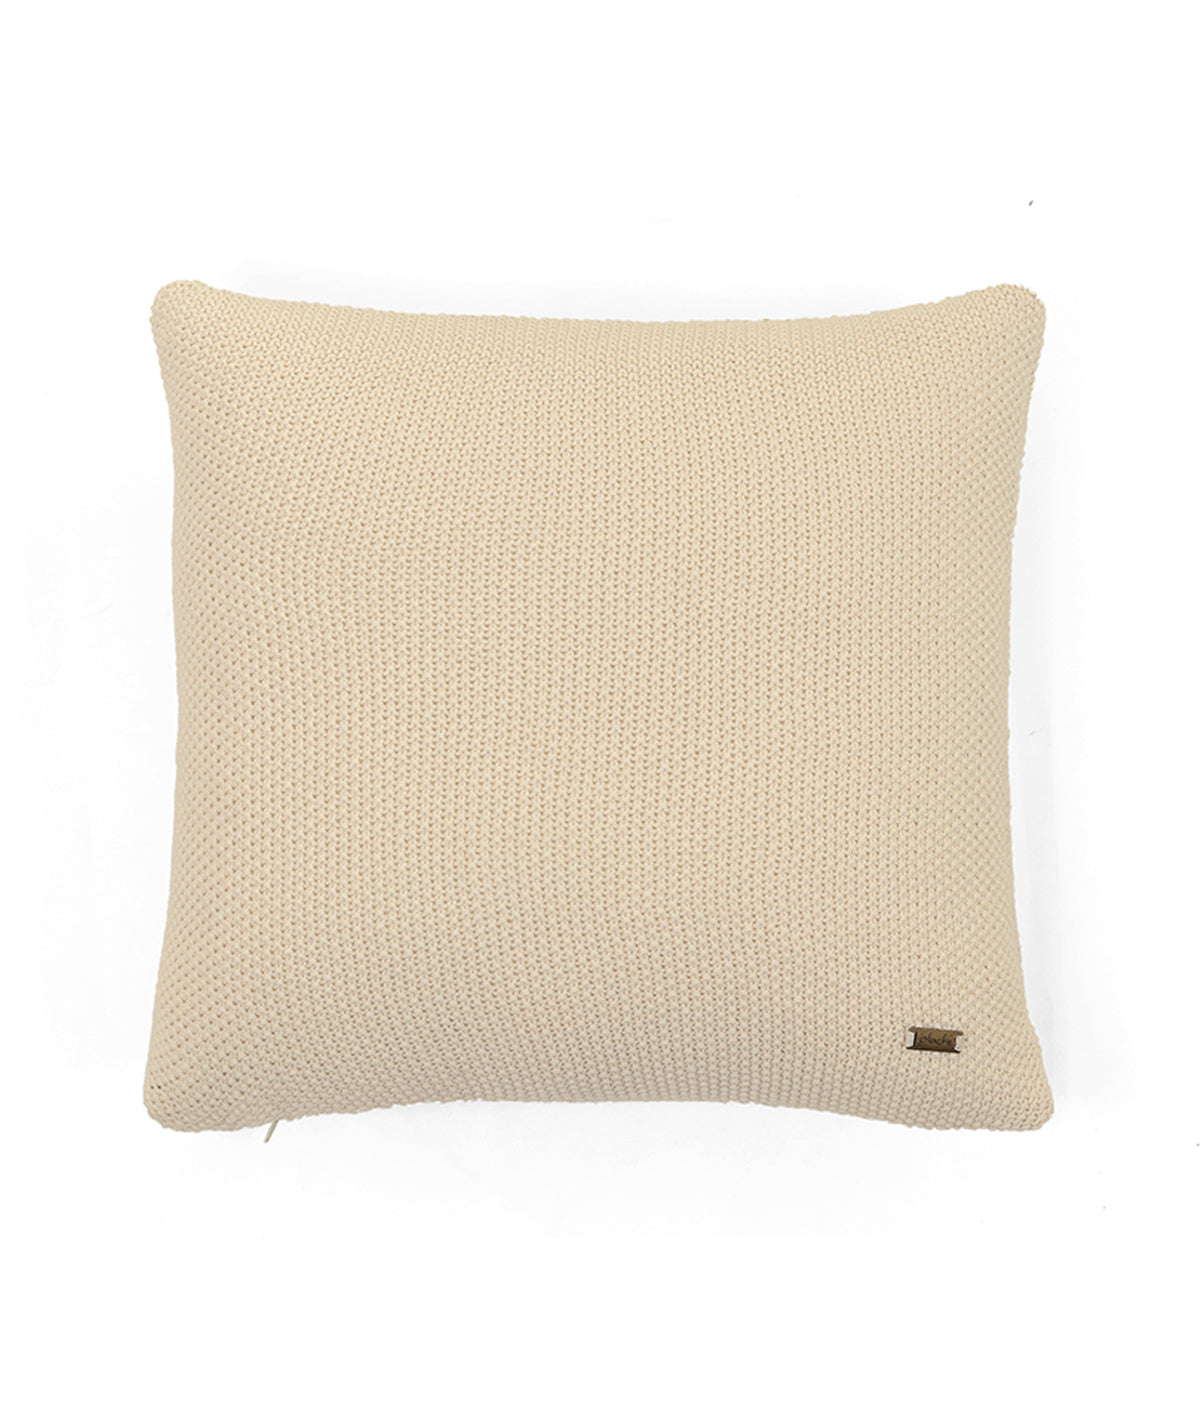 Mini Moss Knit Natural Cotton Knitted Decorative 16 X 16 Inches Cushion Cover